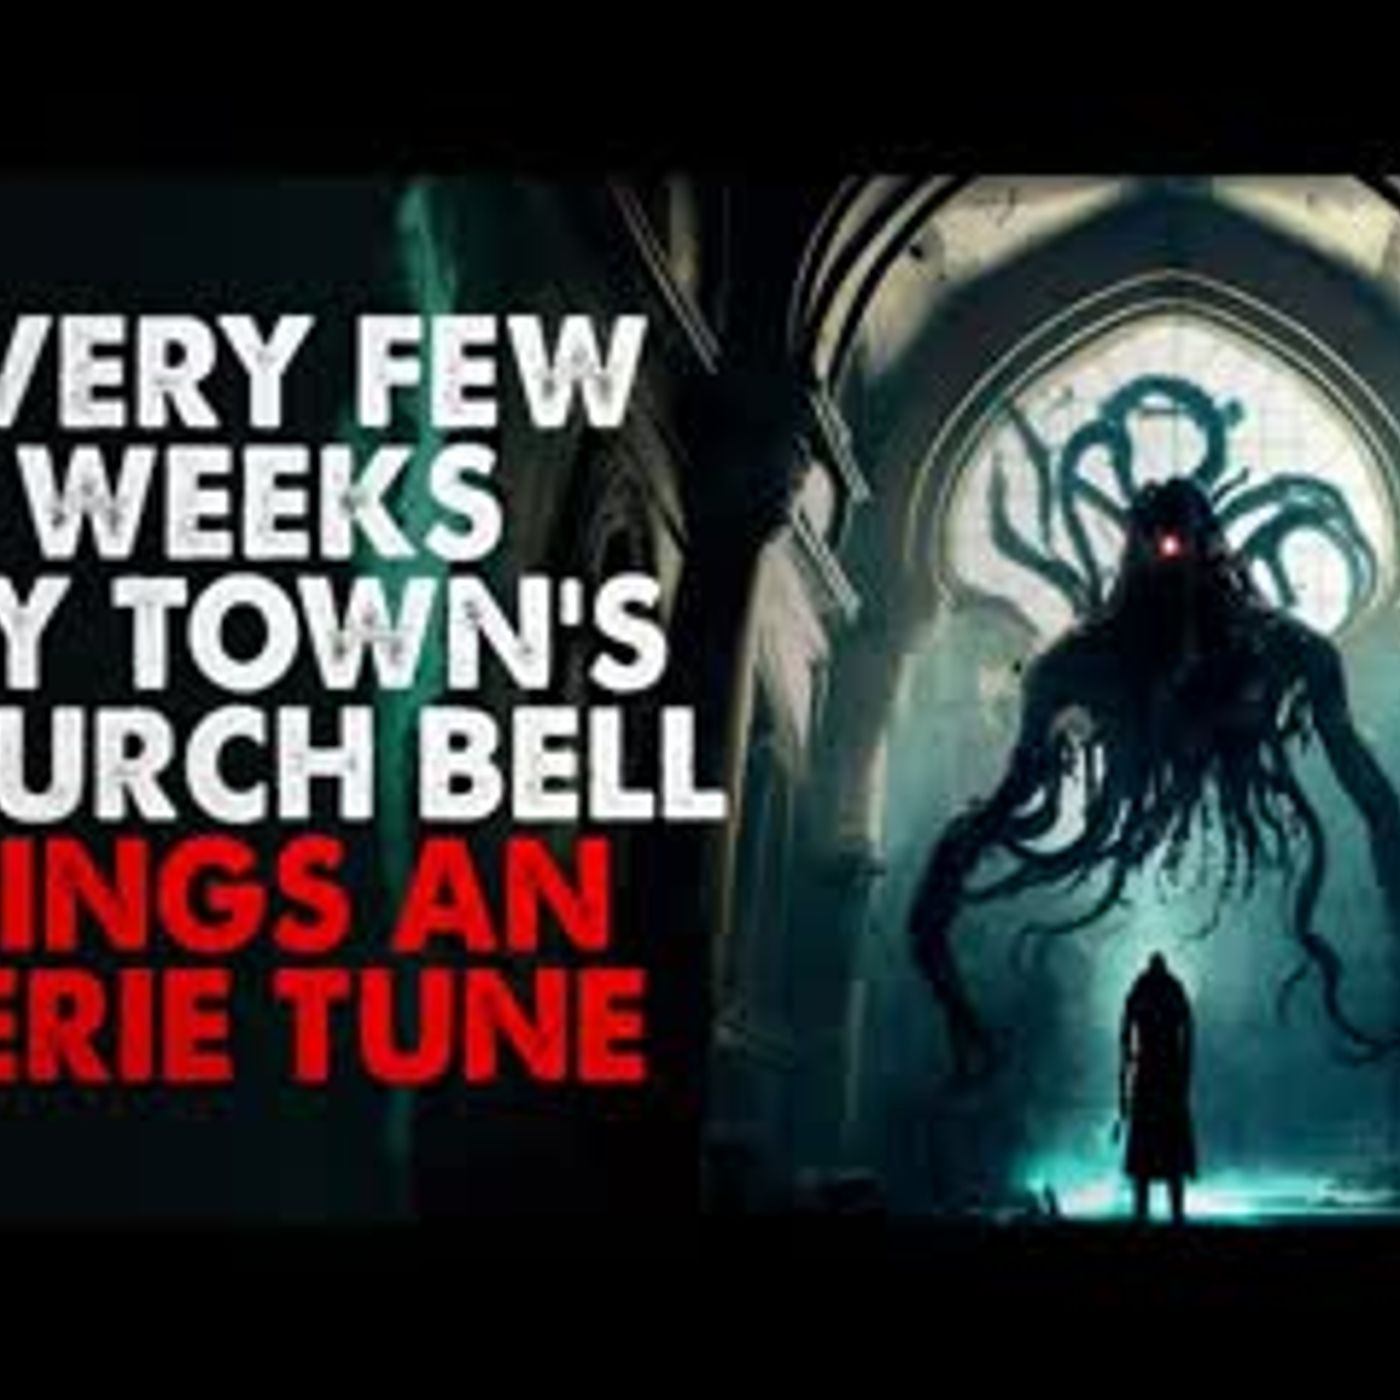 ”Every Few Weeks, My Town's Church Bell Rings An Eerie Tune”　Creepypasta